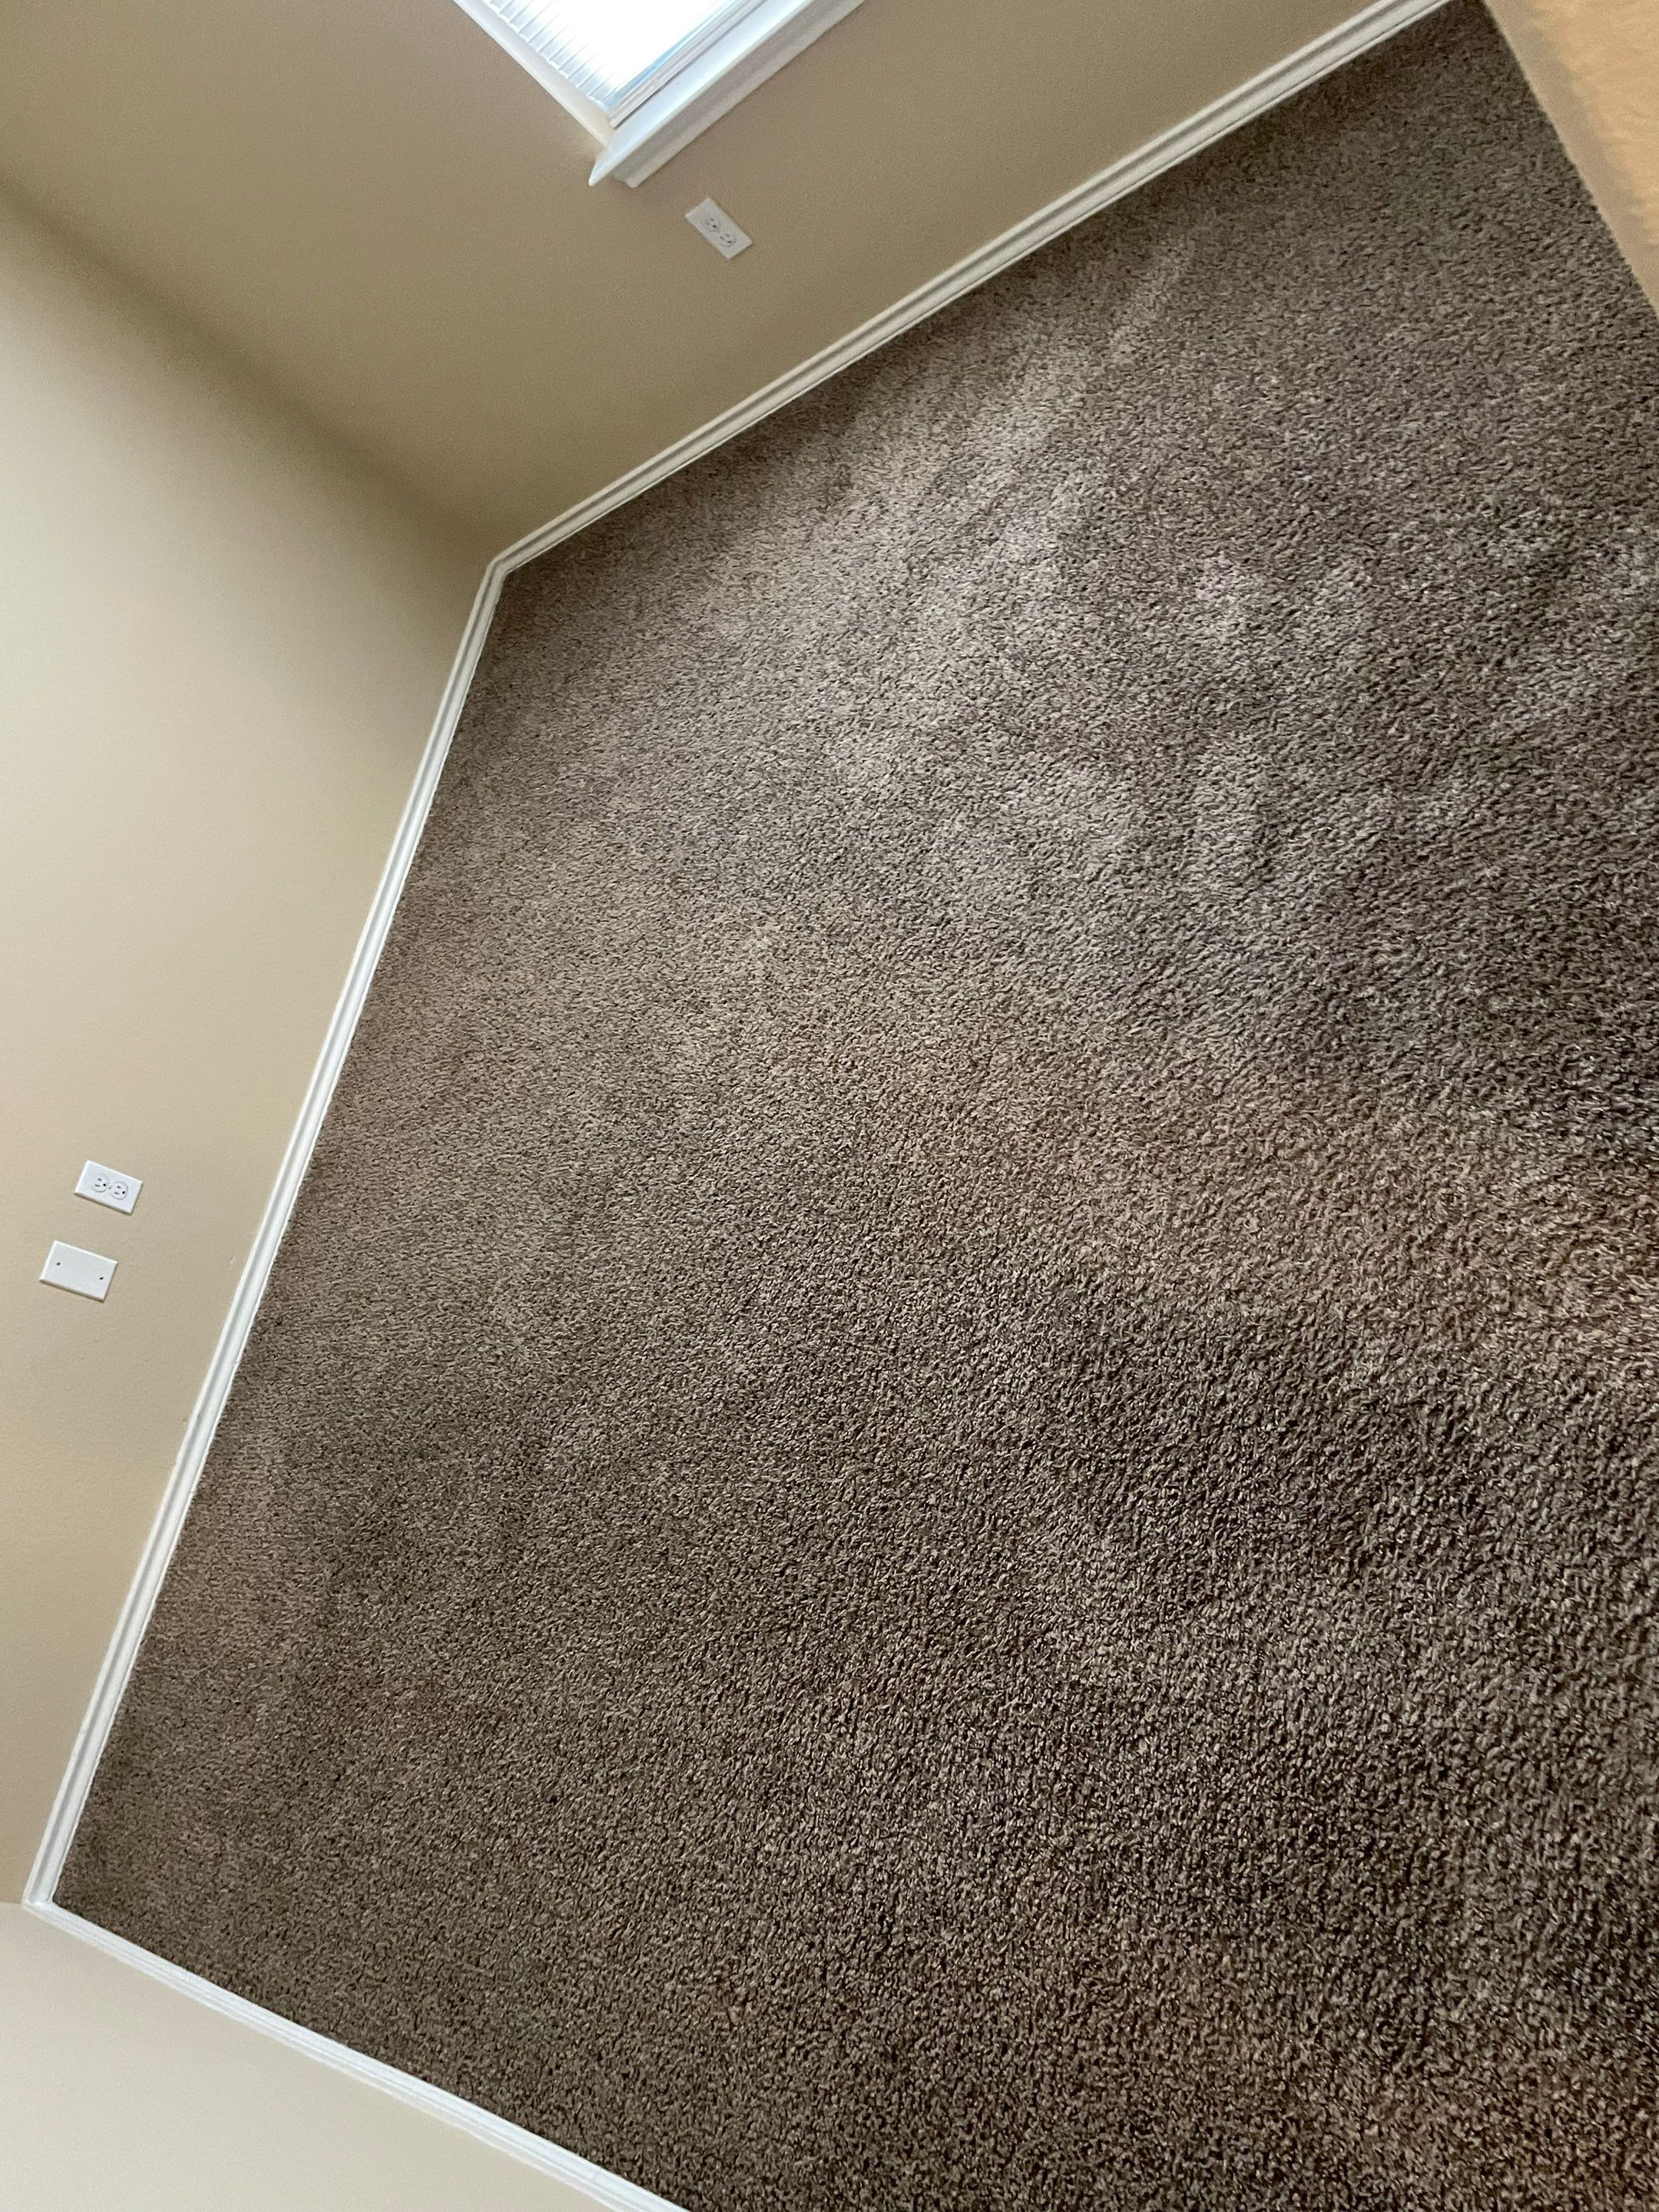 steam cleaning or hot water extraction on residential carpet to remove dirt and stains